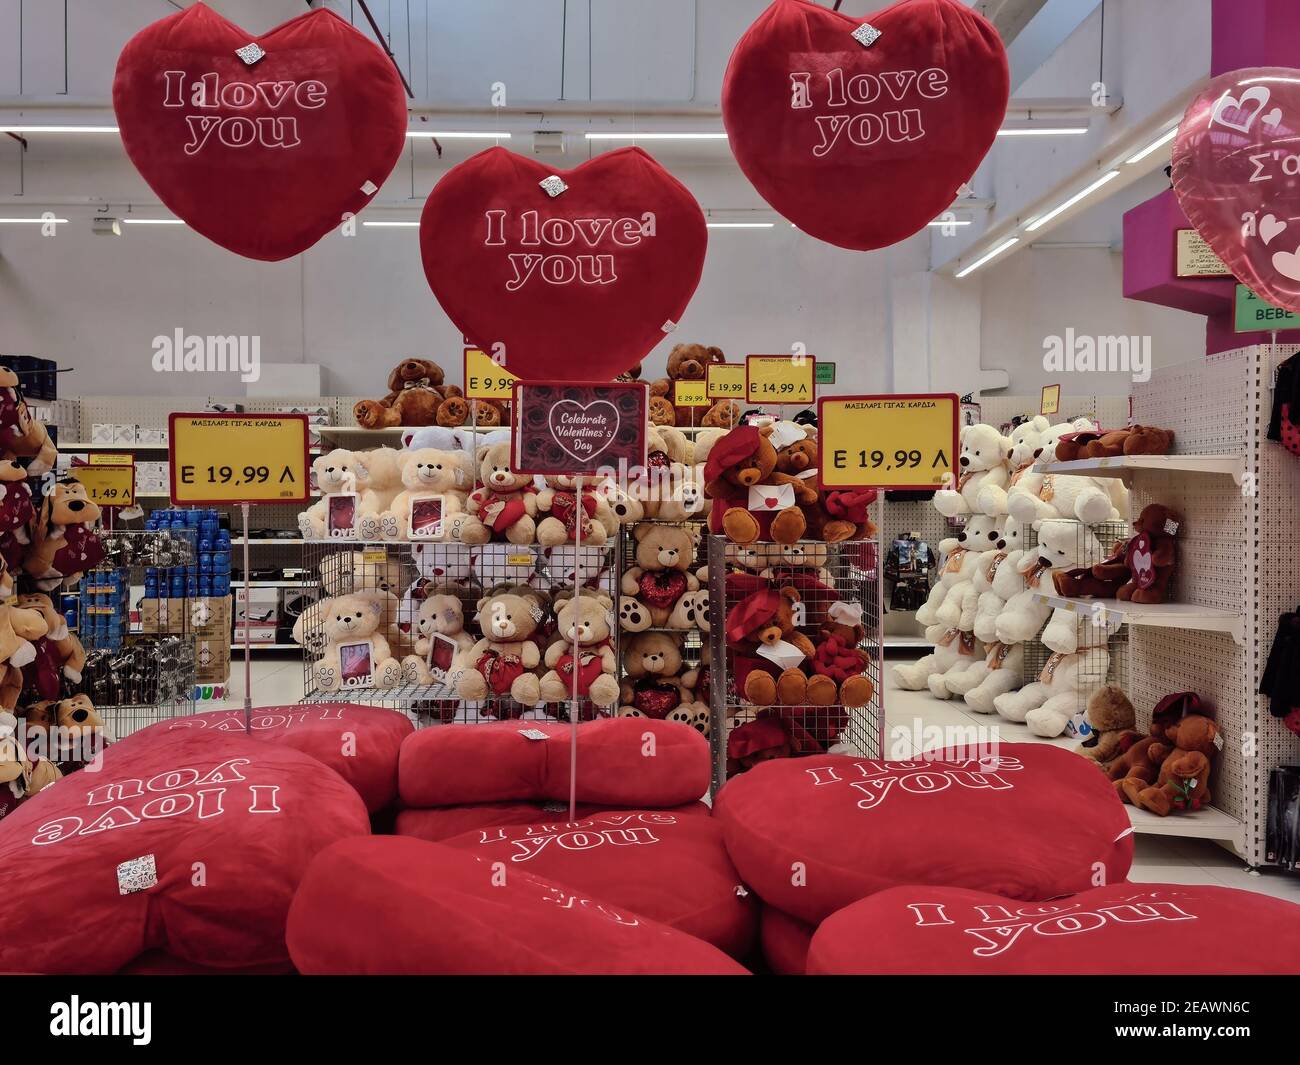 Thessaloniki, Greece - February 3 2021: Happy Valentines day teddy bears  and hearts shop showcase. Interior view of romantic love stuffed toys and  pillows sold as gifts for annual February 14 feast Stock Photo - Alamy